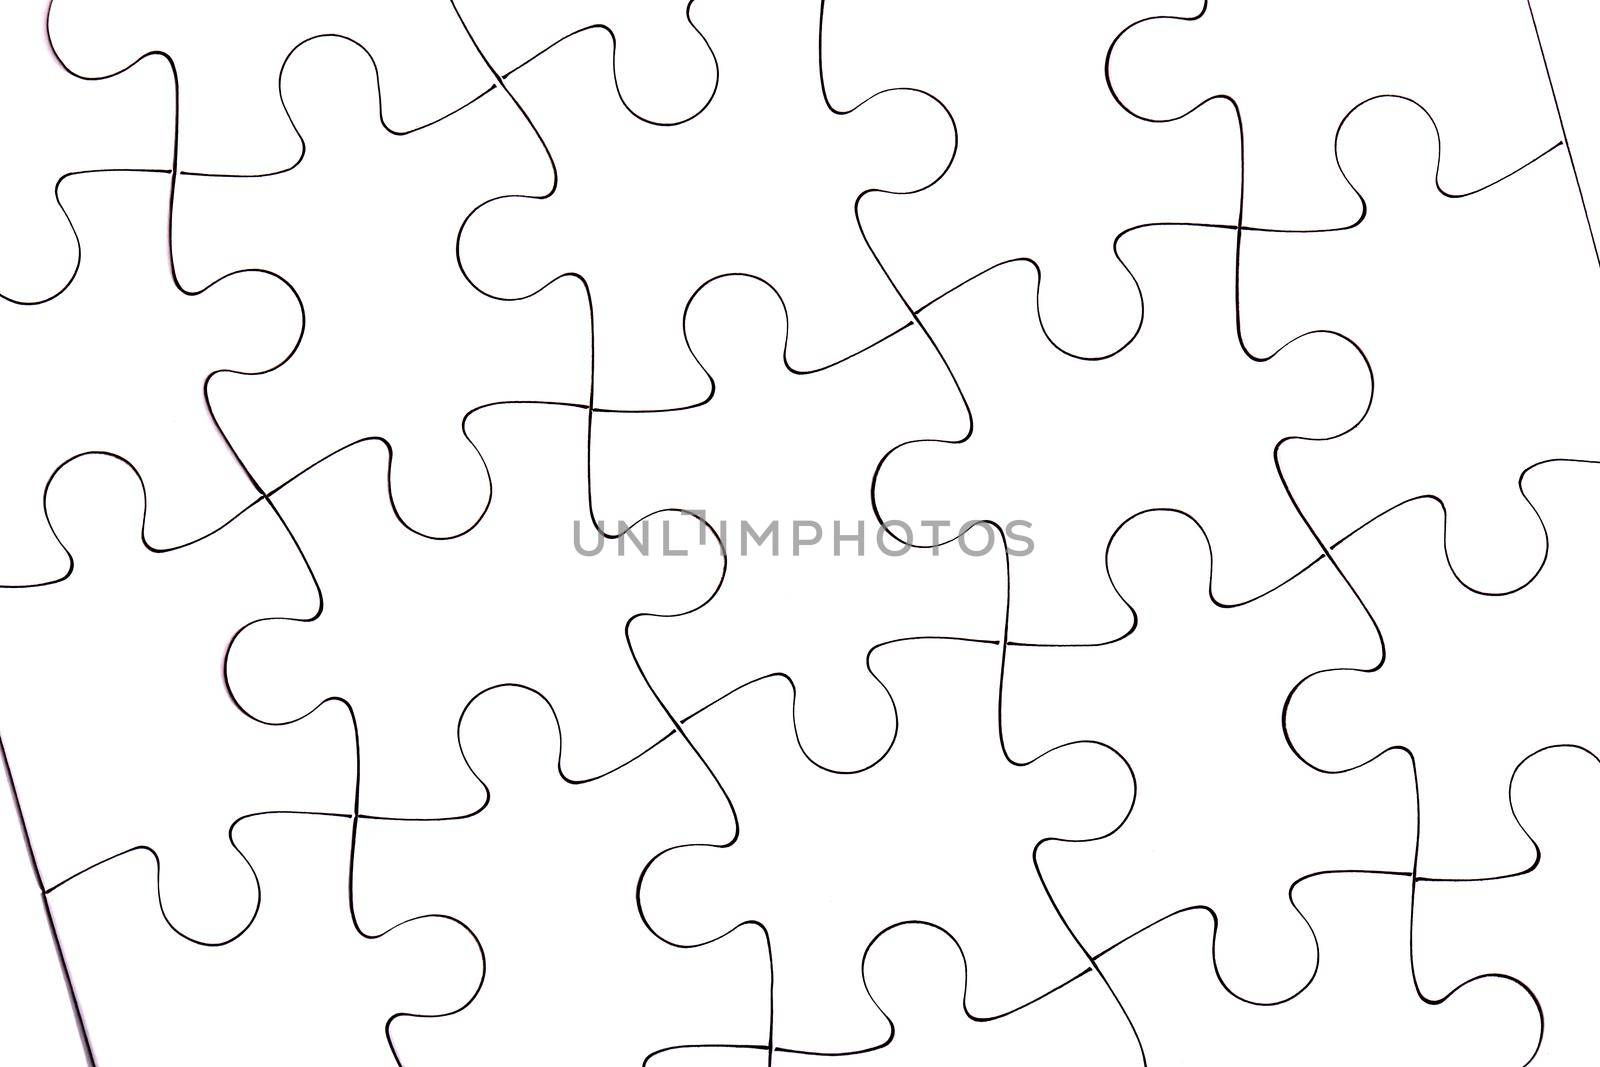 jigsaw puzzle. white pieces forming flawless pattern